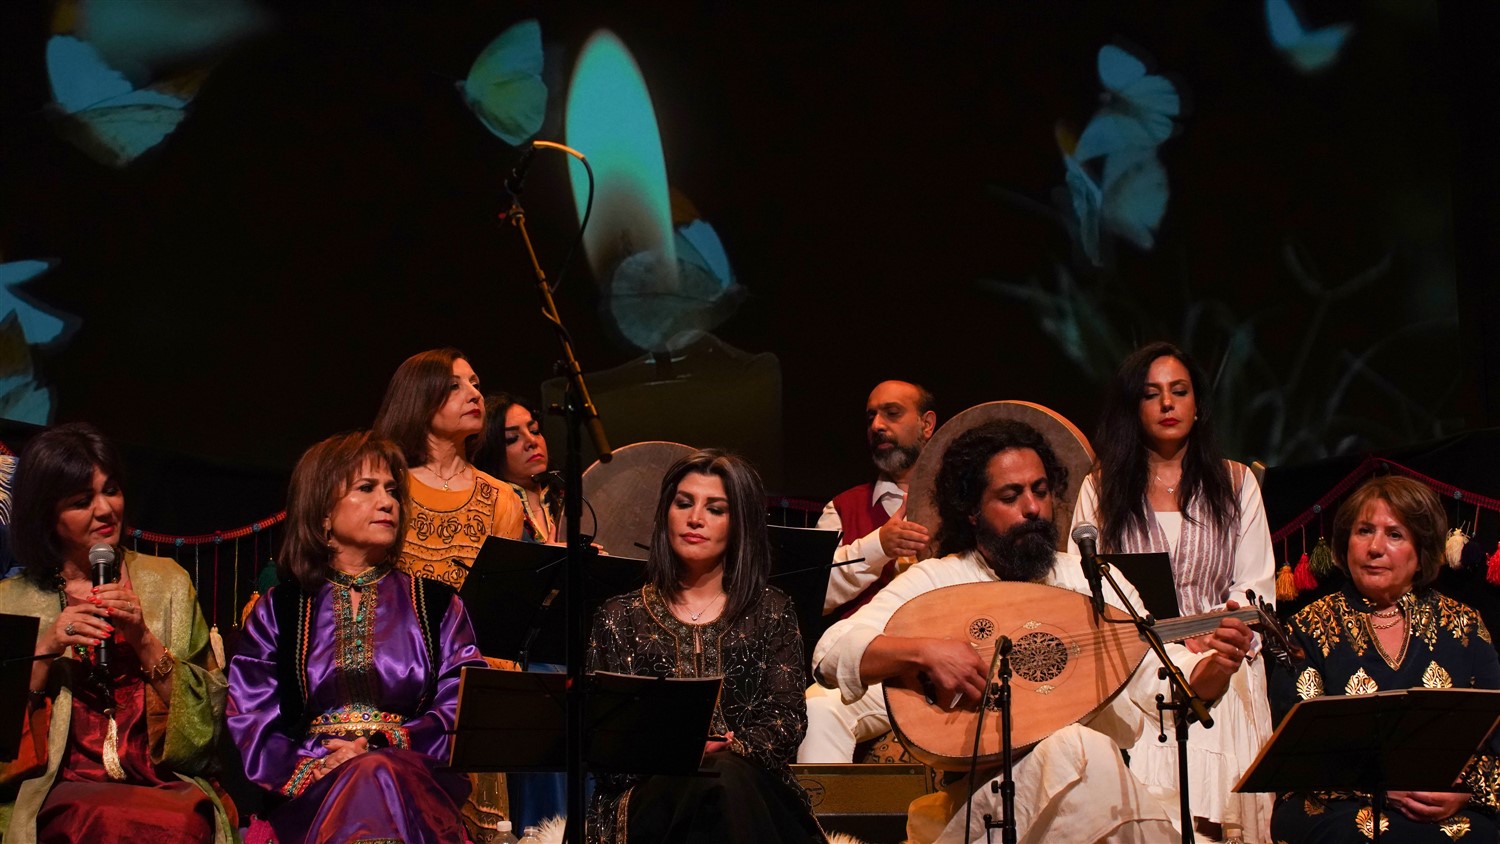 UCI-Molana Khani by Ali Pajooheshgar August 16th, 23rd & 30th on Aug 16, 19:00@UCI humanities 1341 Persian Conference Room (UCI, Irvine) - Buy tickets and Get information on Rumi Academy rumiacademy.org